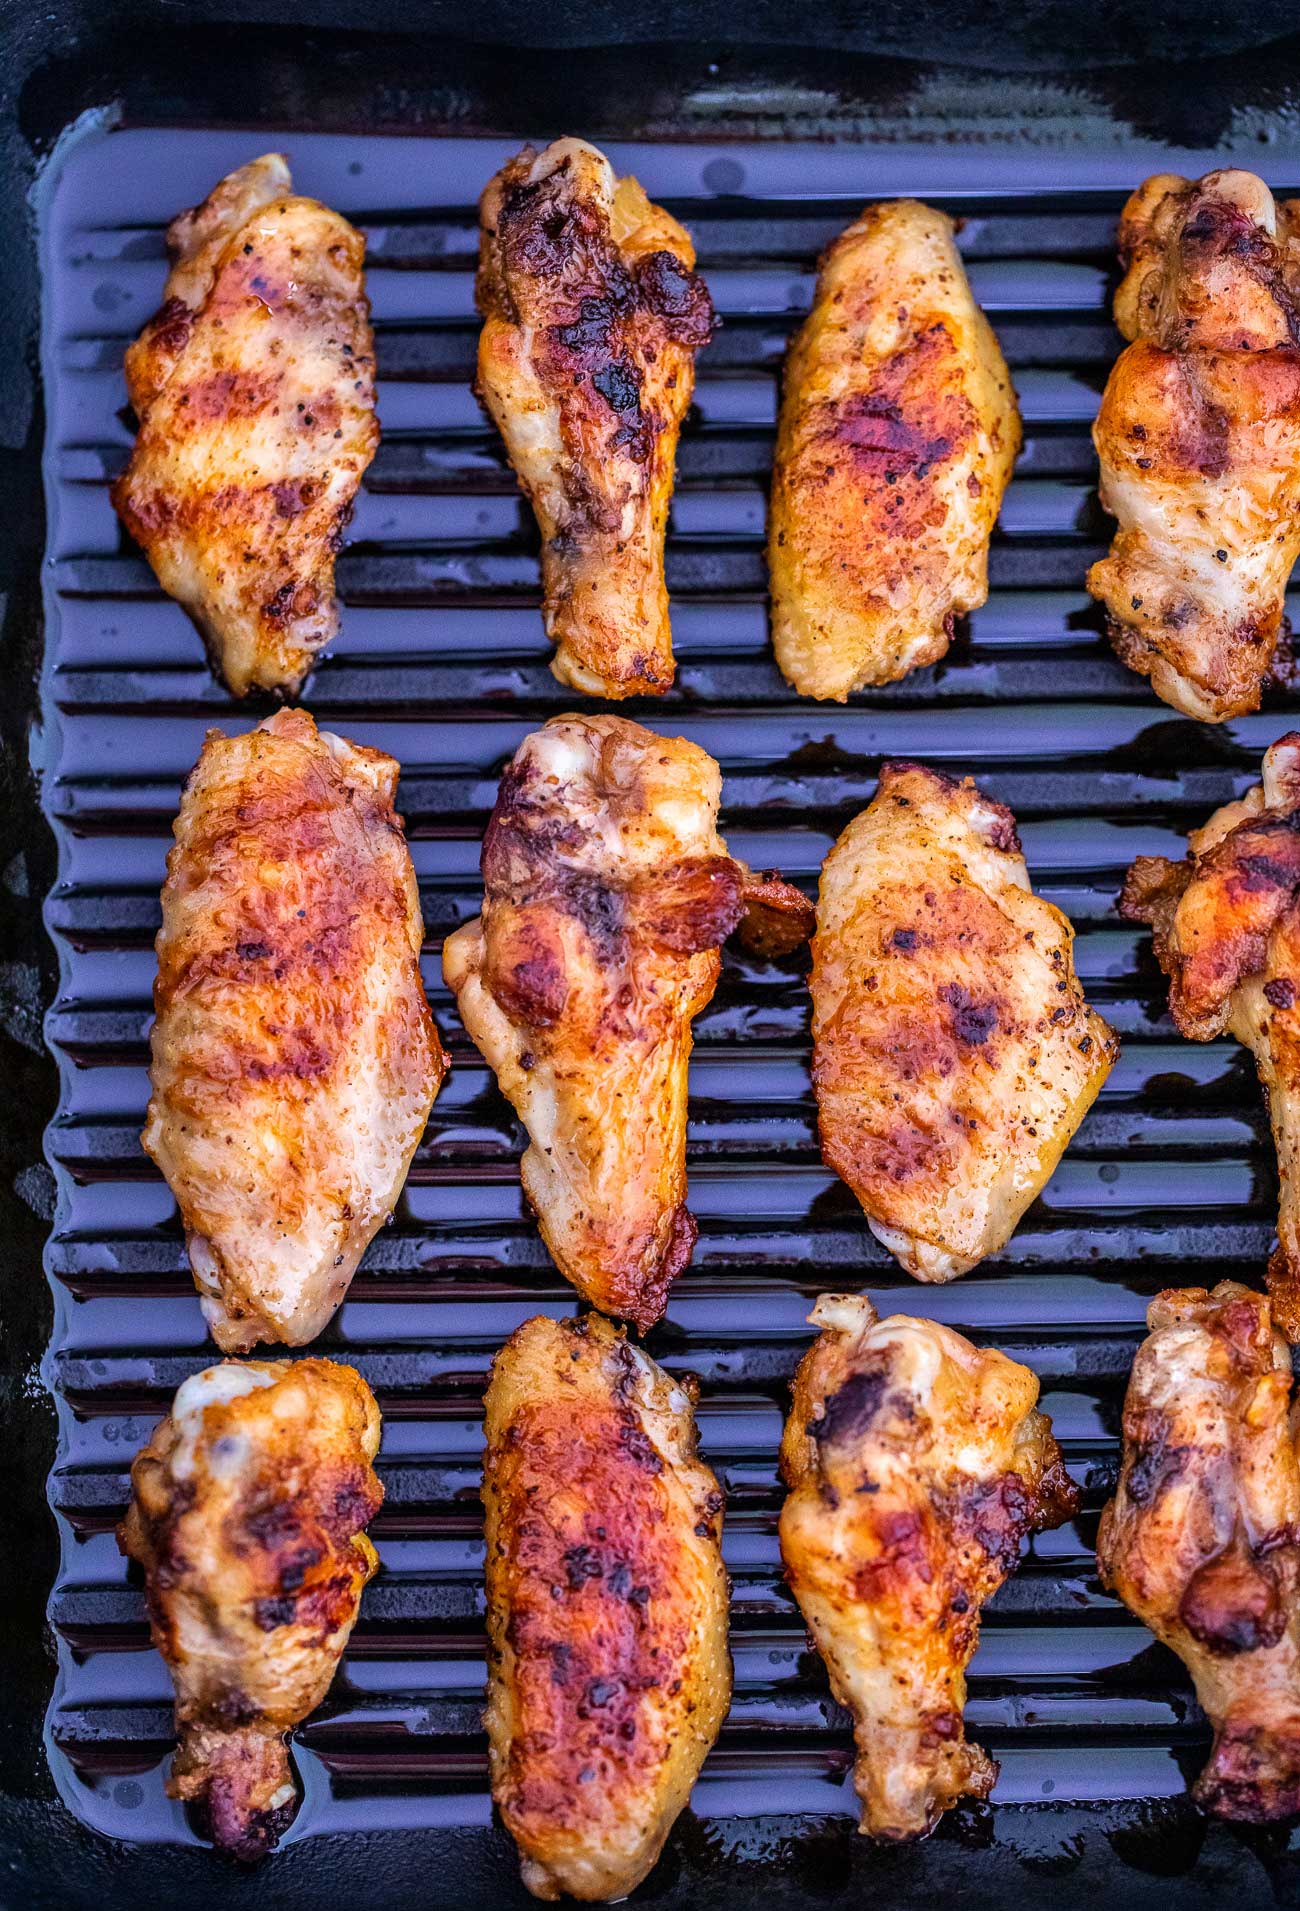 Grilled Chicken Wings Recipe Video Sweet And Savory Meals,Fall Flowers